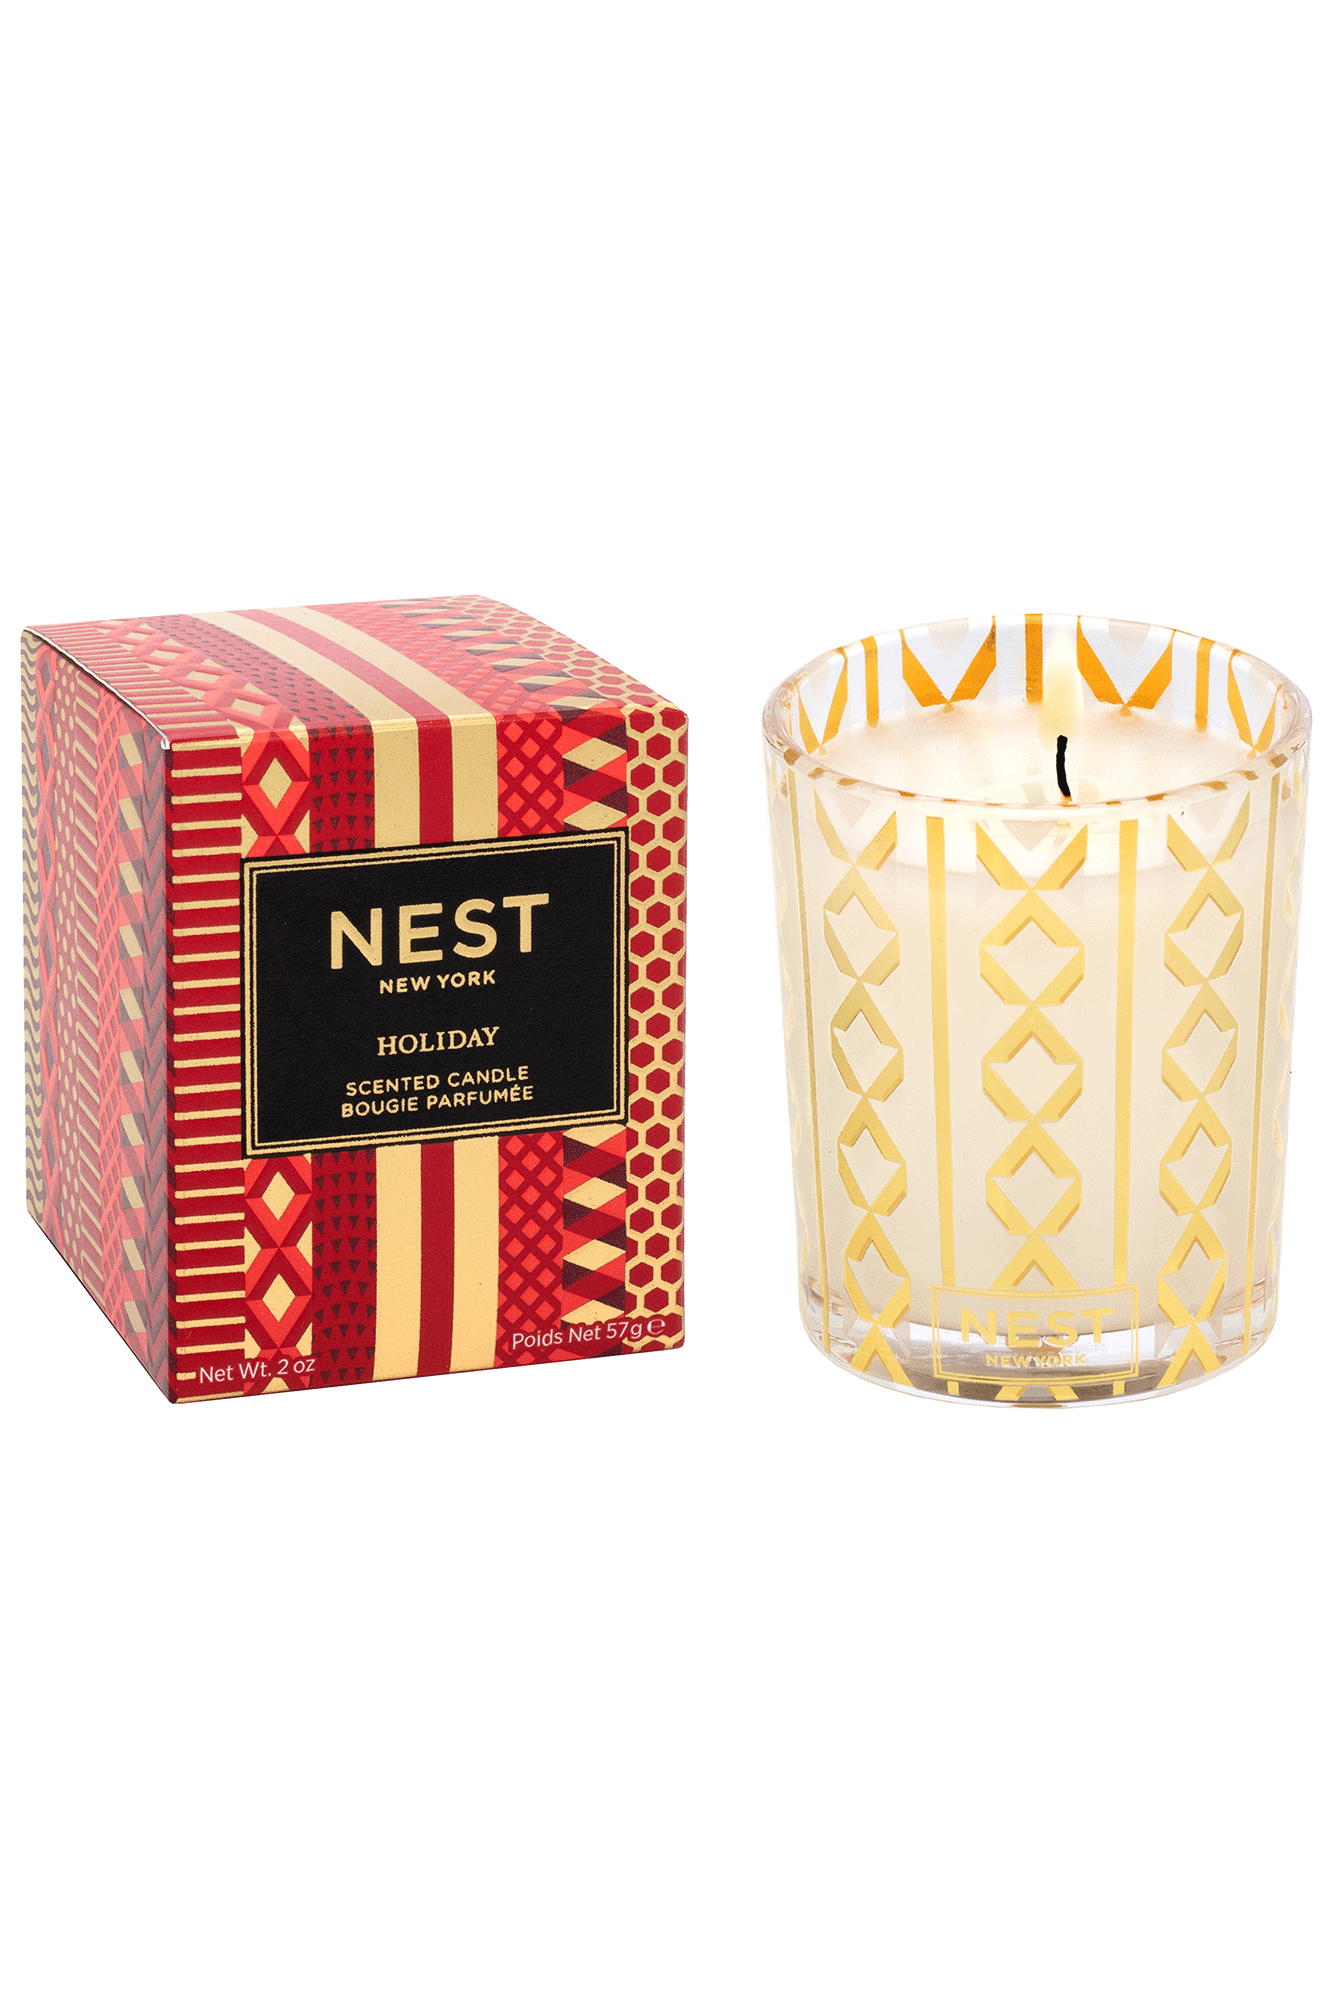 This exquisite Holiday Classic Votive from Nest will fill your home with the quintessential aroma of the season. A sophisticated blend of pomegranate, mandarin orange, pine, cloves, cinnamon, vanilla, and amber, this bestselling fragrance will bring a cozy and warm atmosphere to any room.